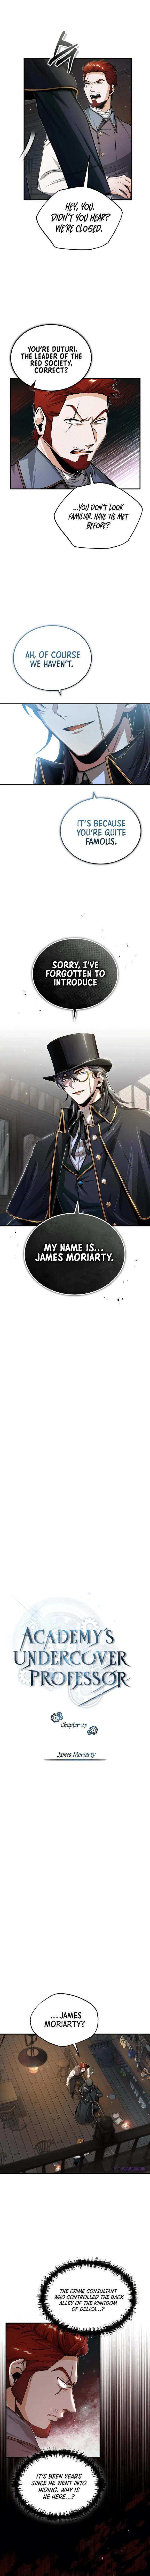 Academy’s Undercover Professor Chapter 27 - James Moriarty page 4